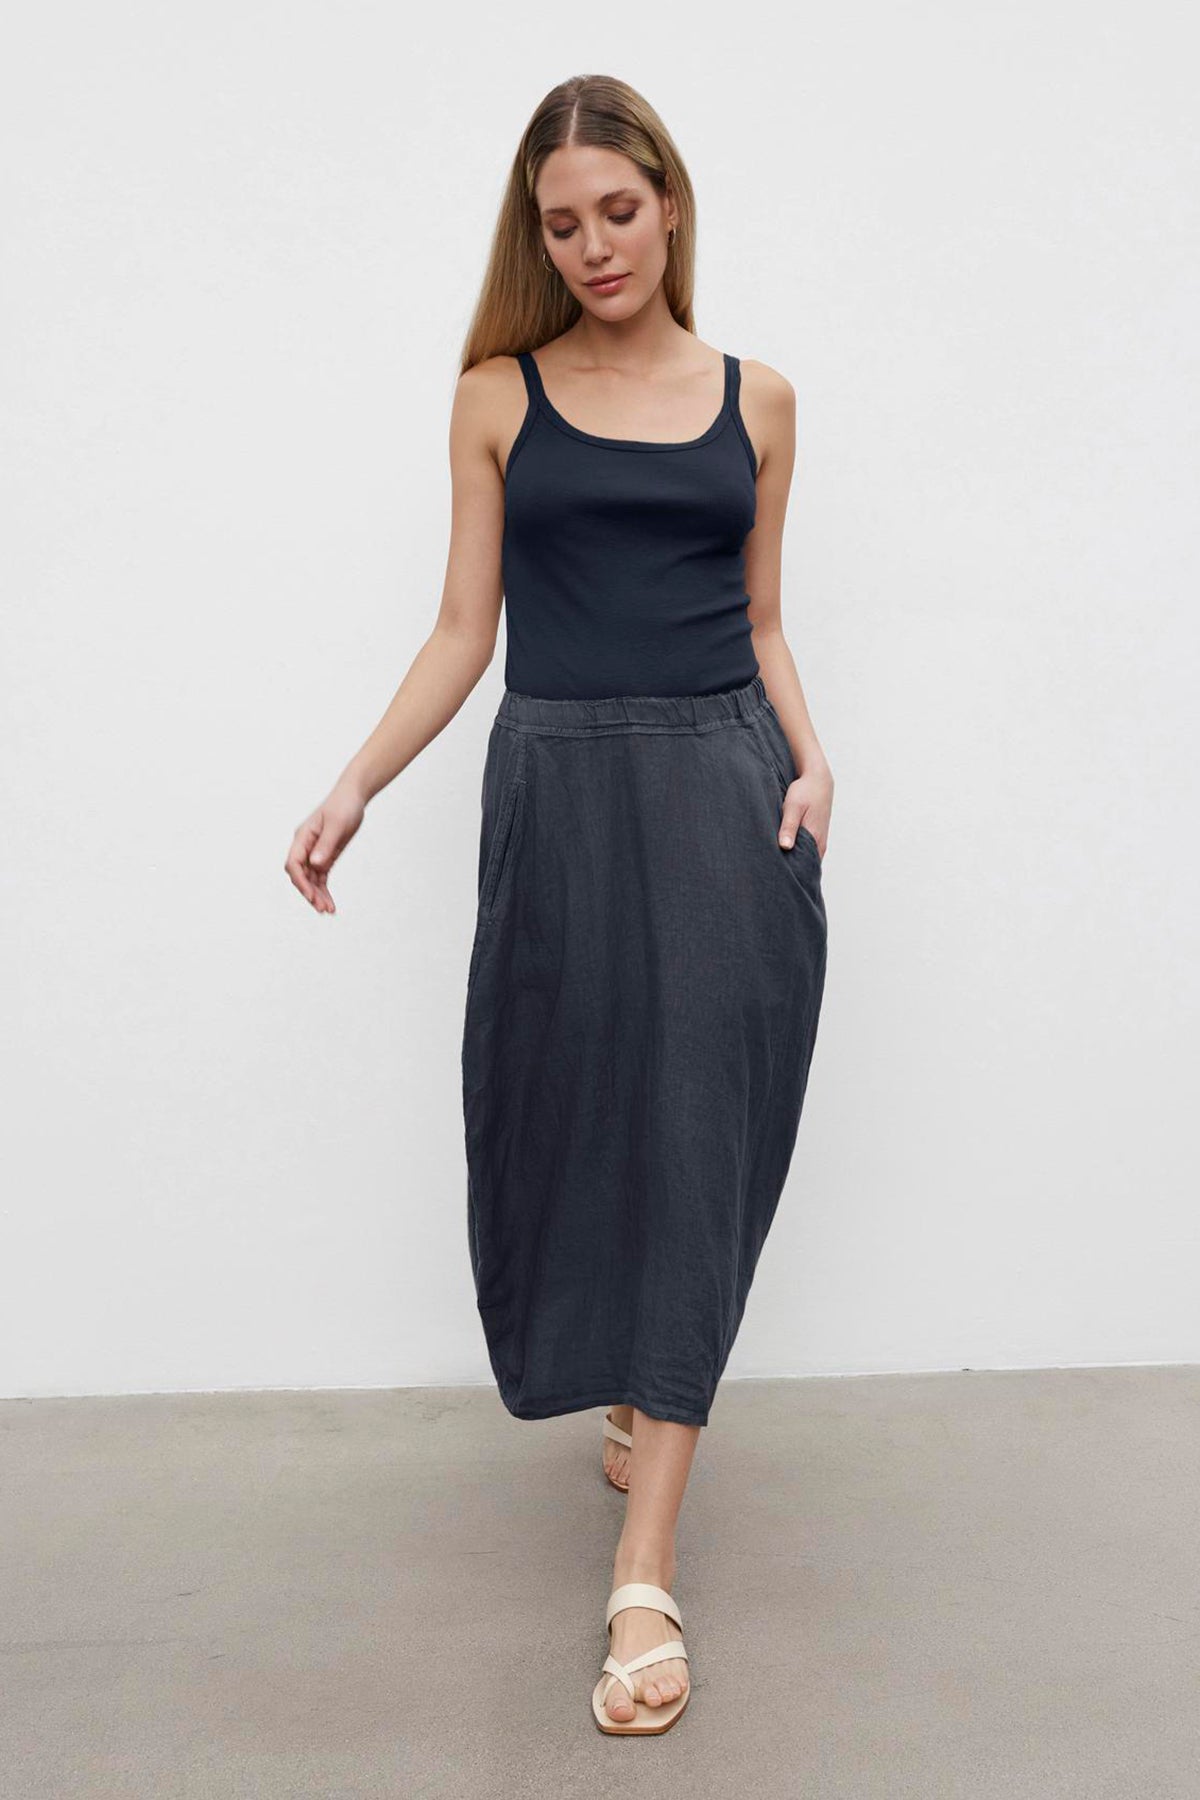 A young woman in a casual black tank top and a gray Velvet by Graham & Spencer FAE LINEN A-LINE SKIRT, standing against a plain white background.-36676258005185